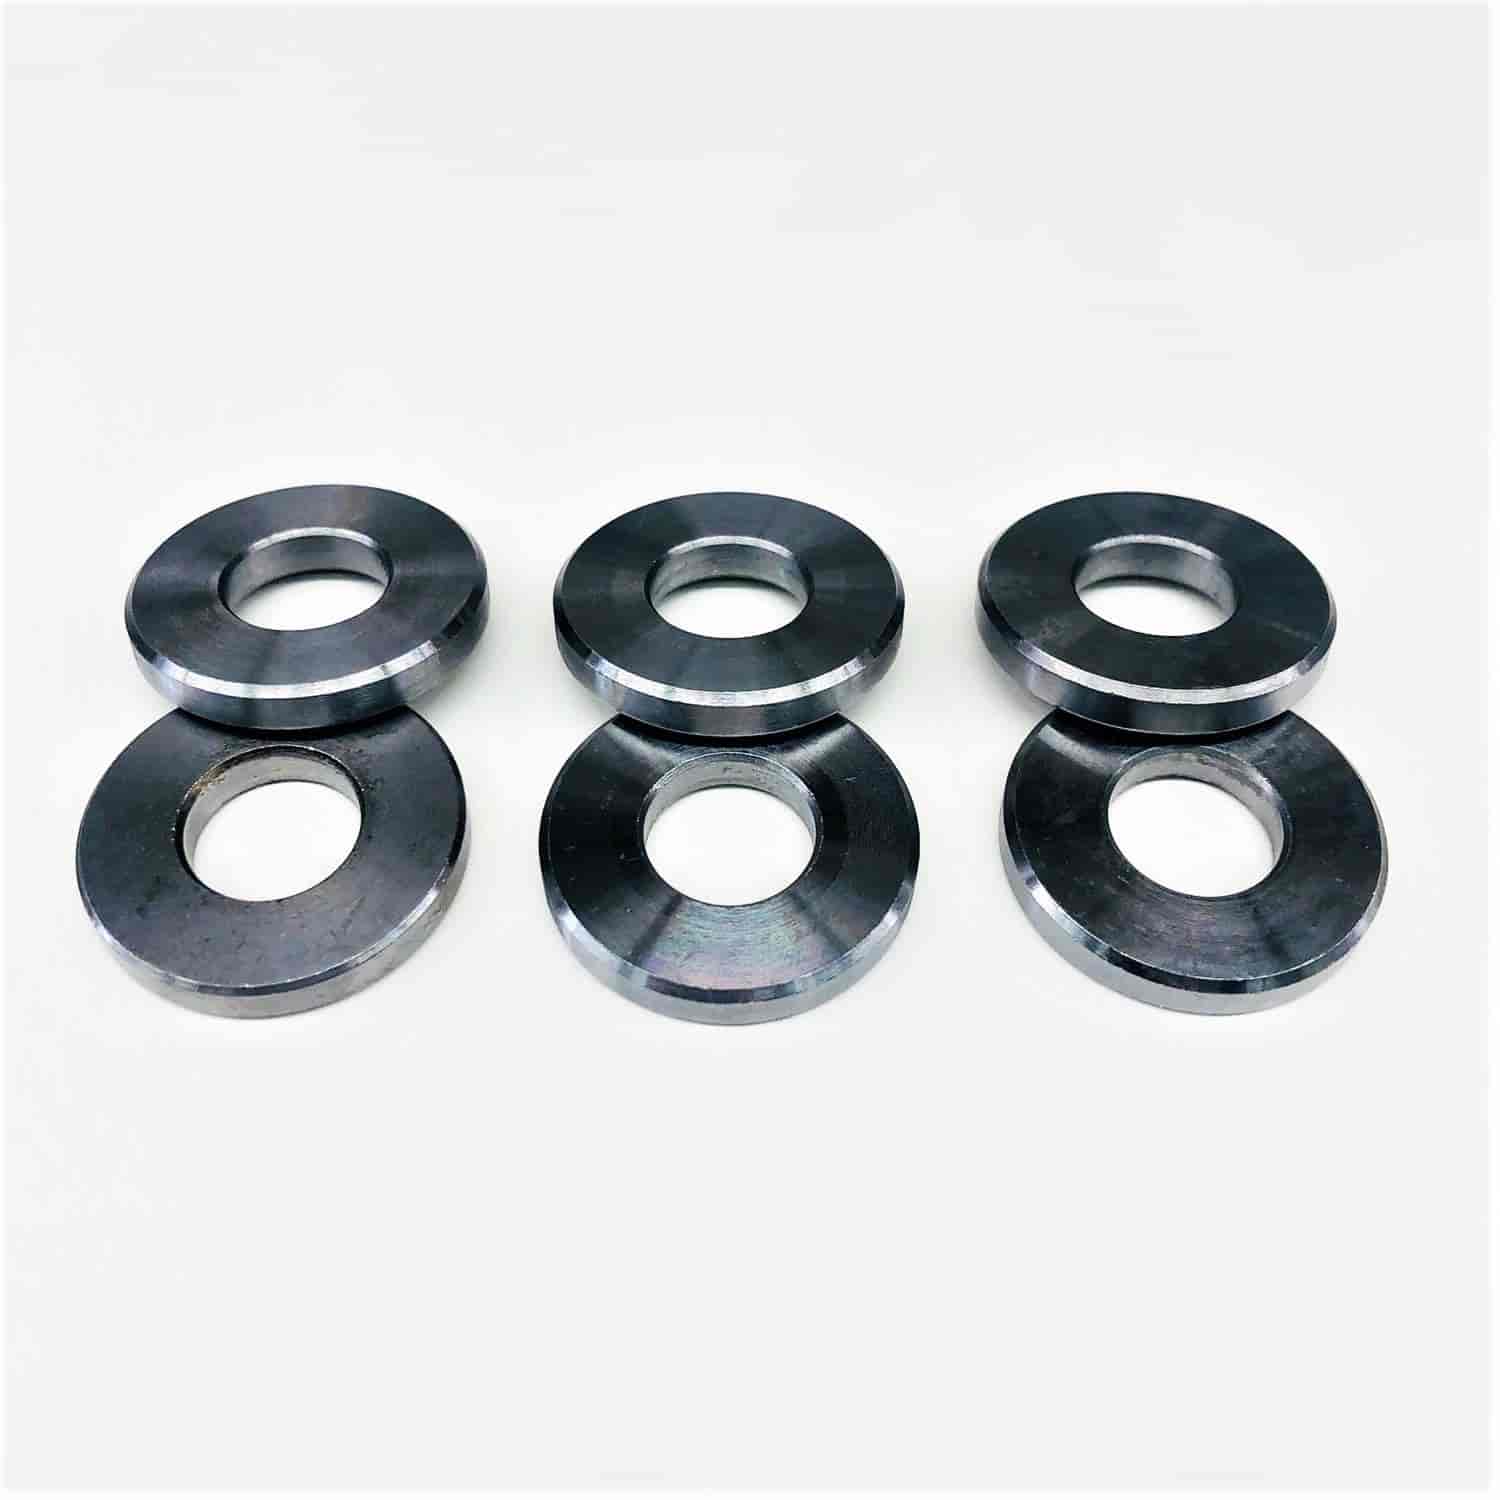 Torque Converter Spacers (Shims) .150 in. Thick